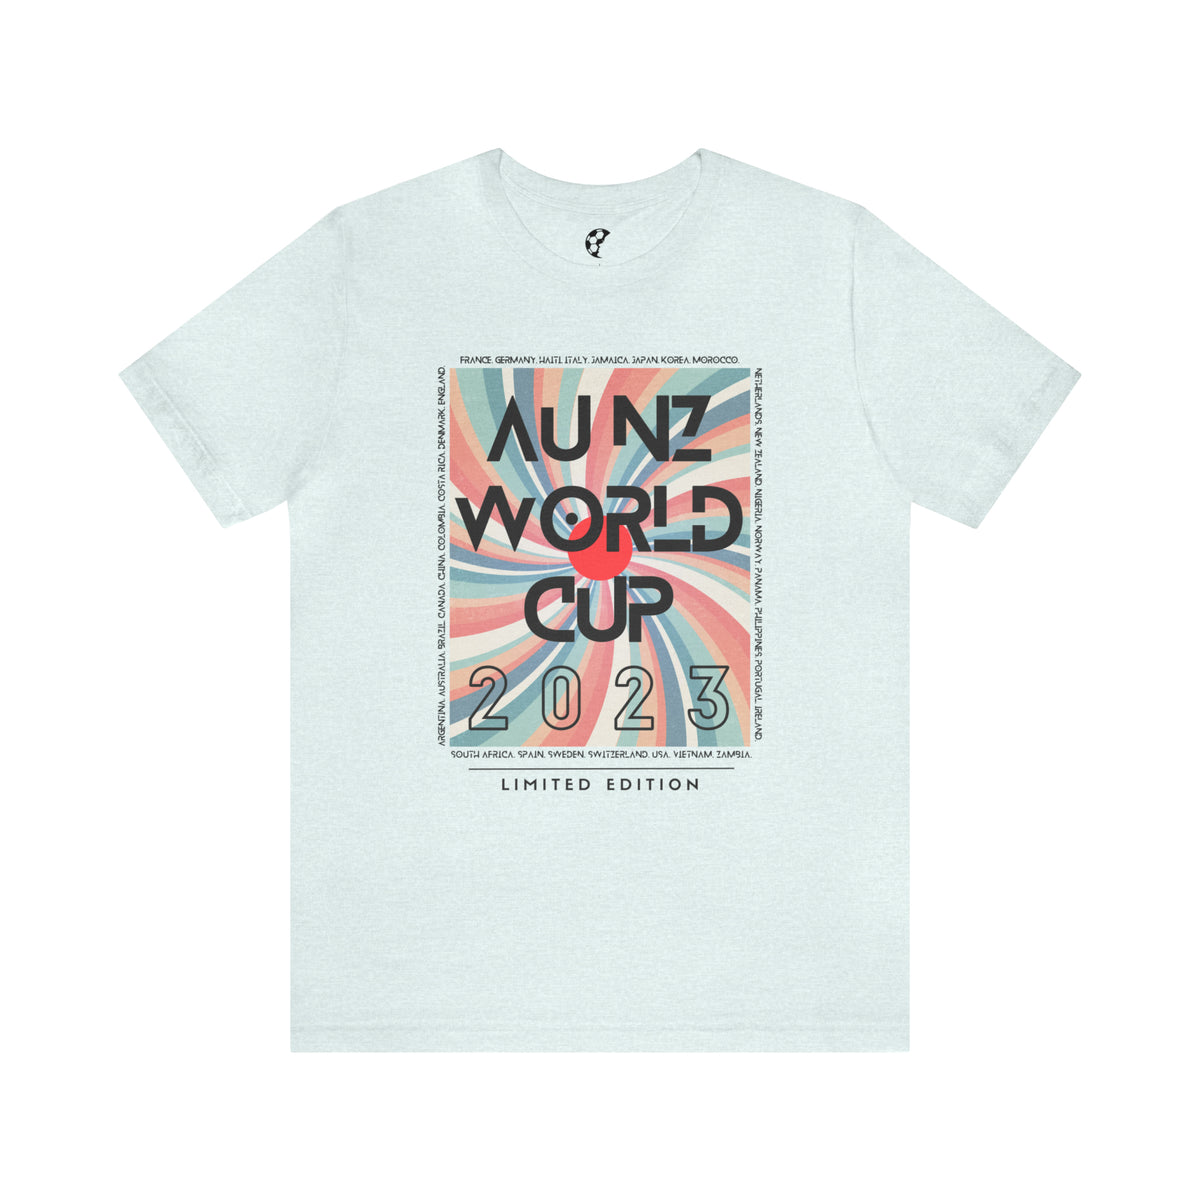 Limited Edition AU-NZ World Cup Adult T-Shirt